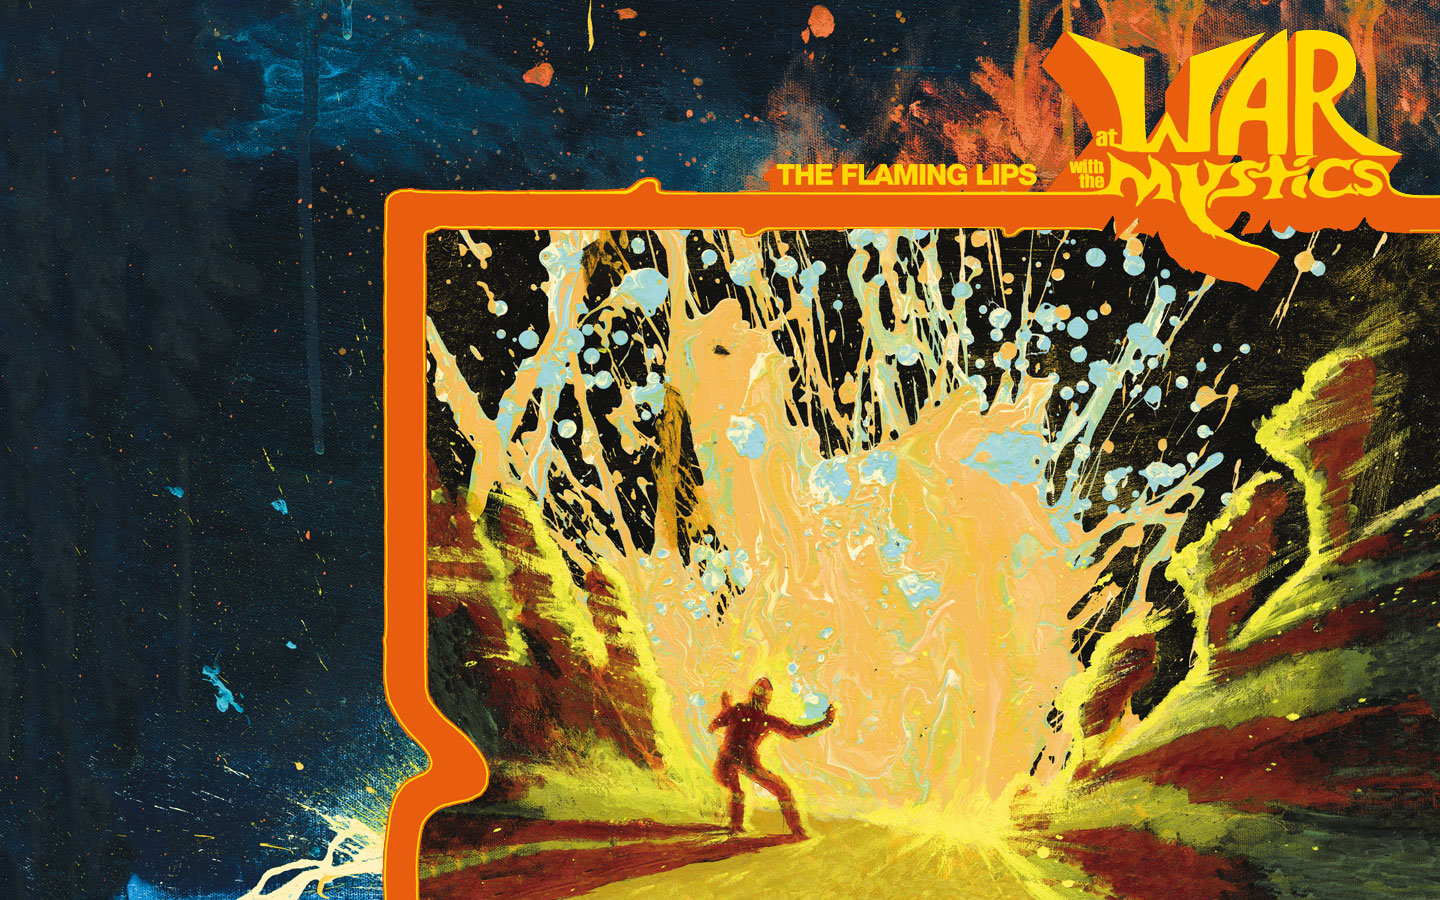 The Flaming Lips - At War with the Mystics Artwork Desktop and other